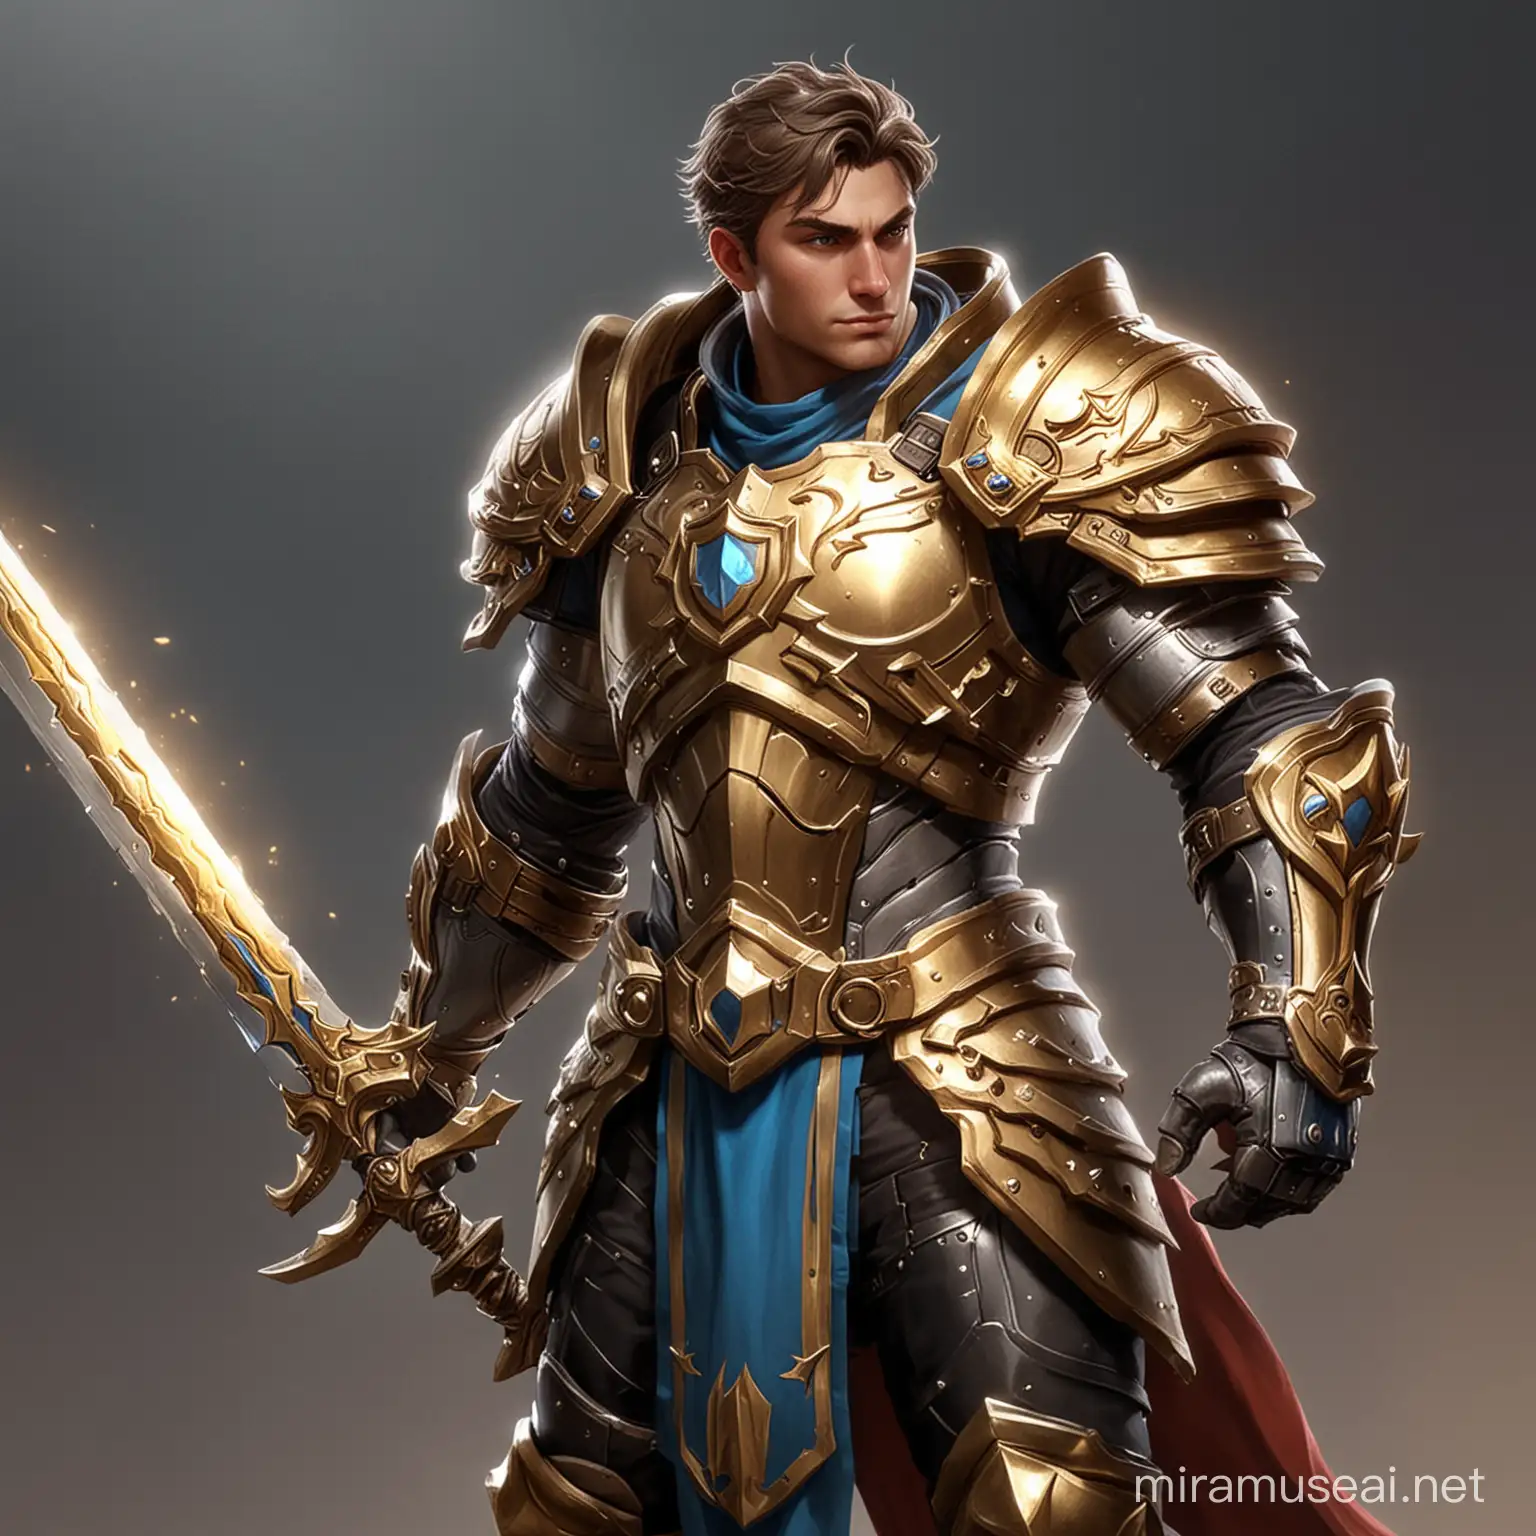 Garen in Holy Paladin Armor with Shining TwoHanded Sword